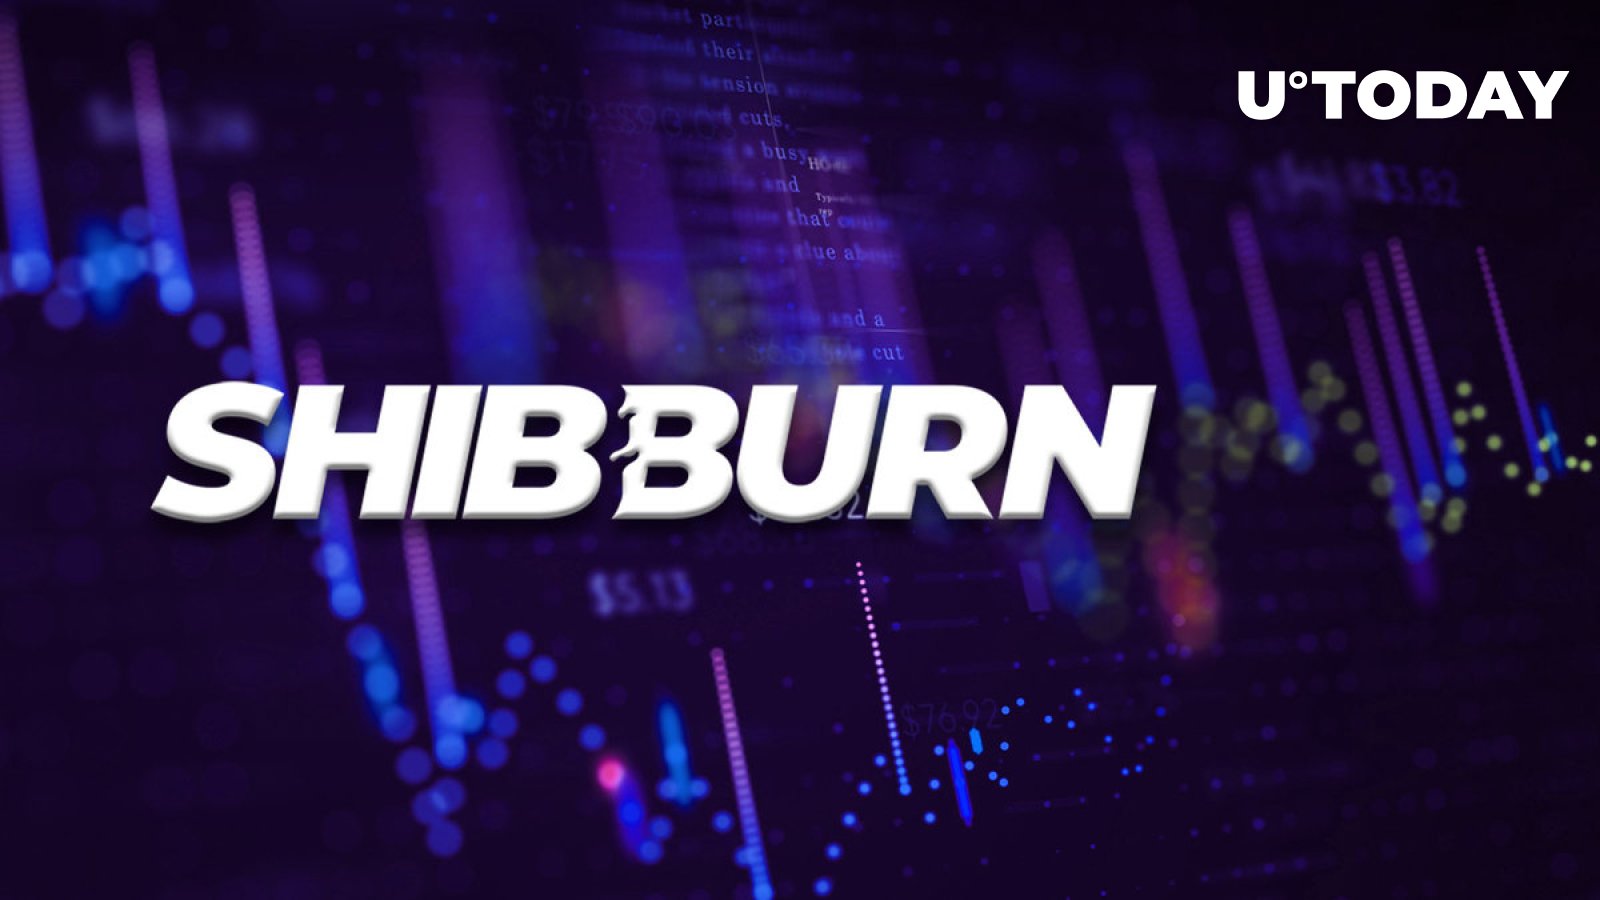 SHIB Burn Rate Shoots up 1,064% After These New Milestones